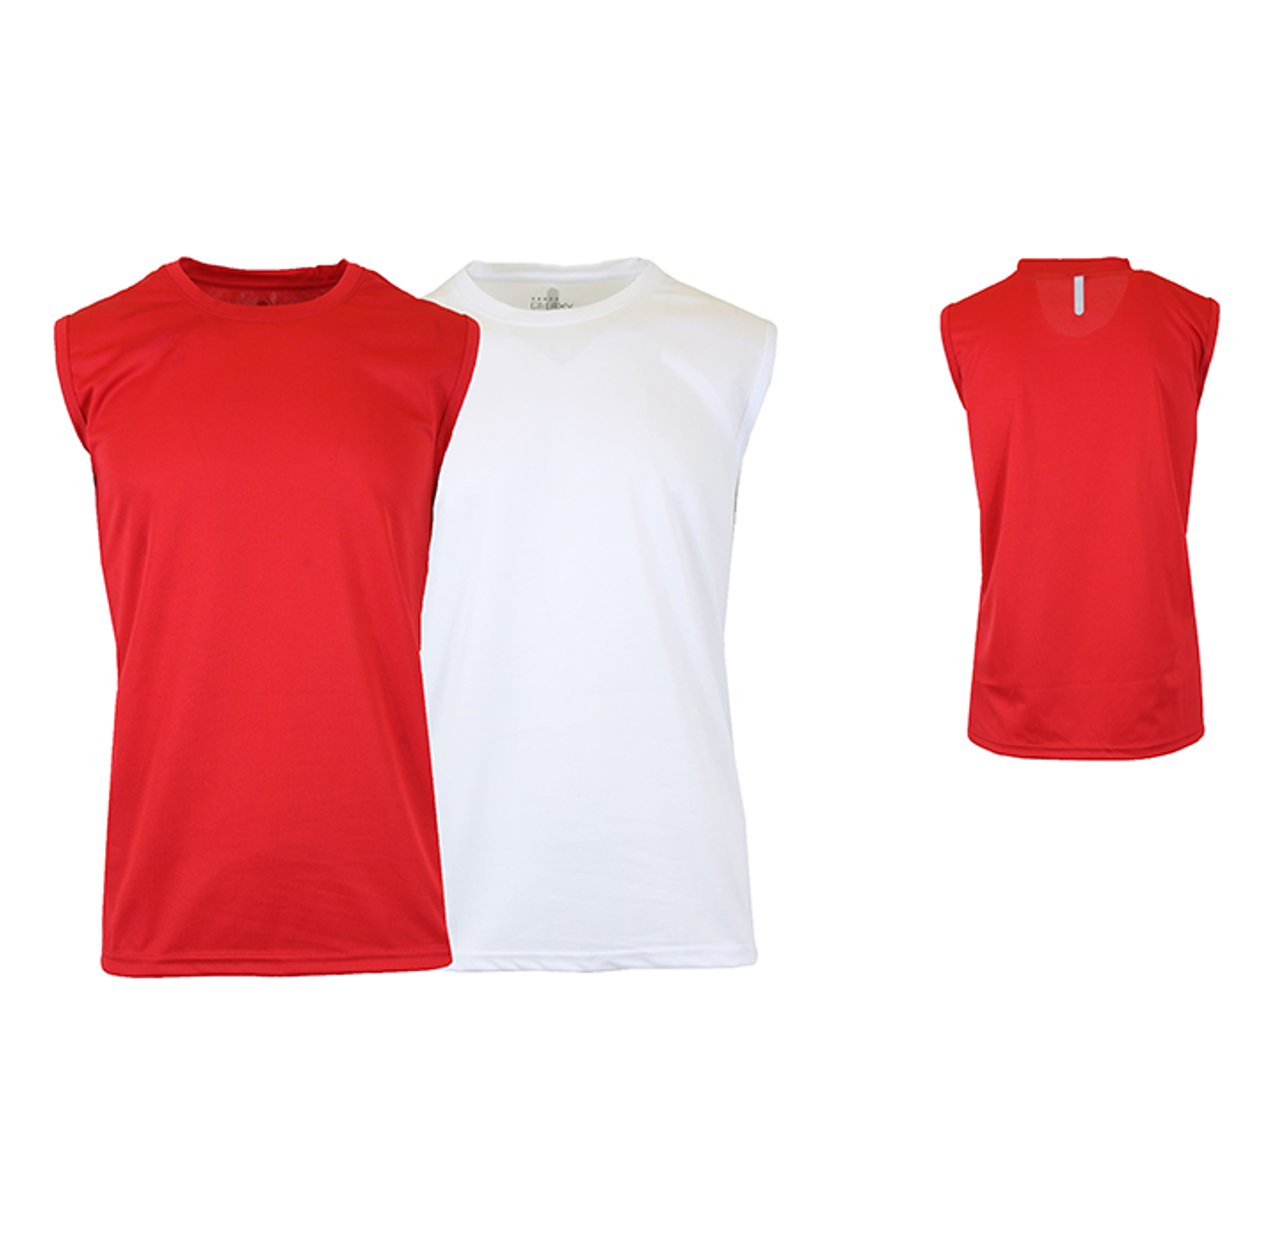 Men's Moisture-Wicking Performance Tops (2-Pack) product image